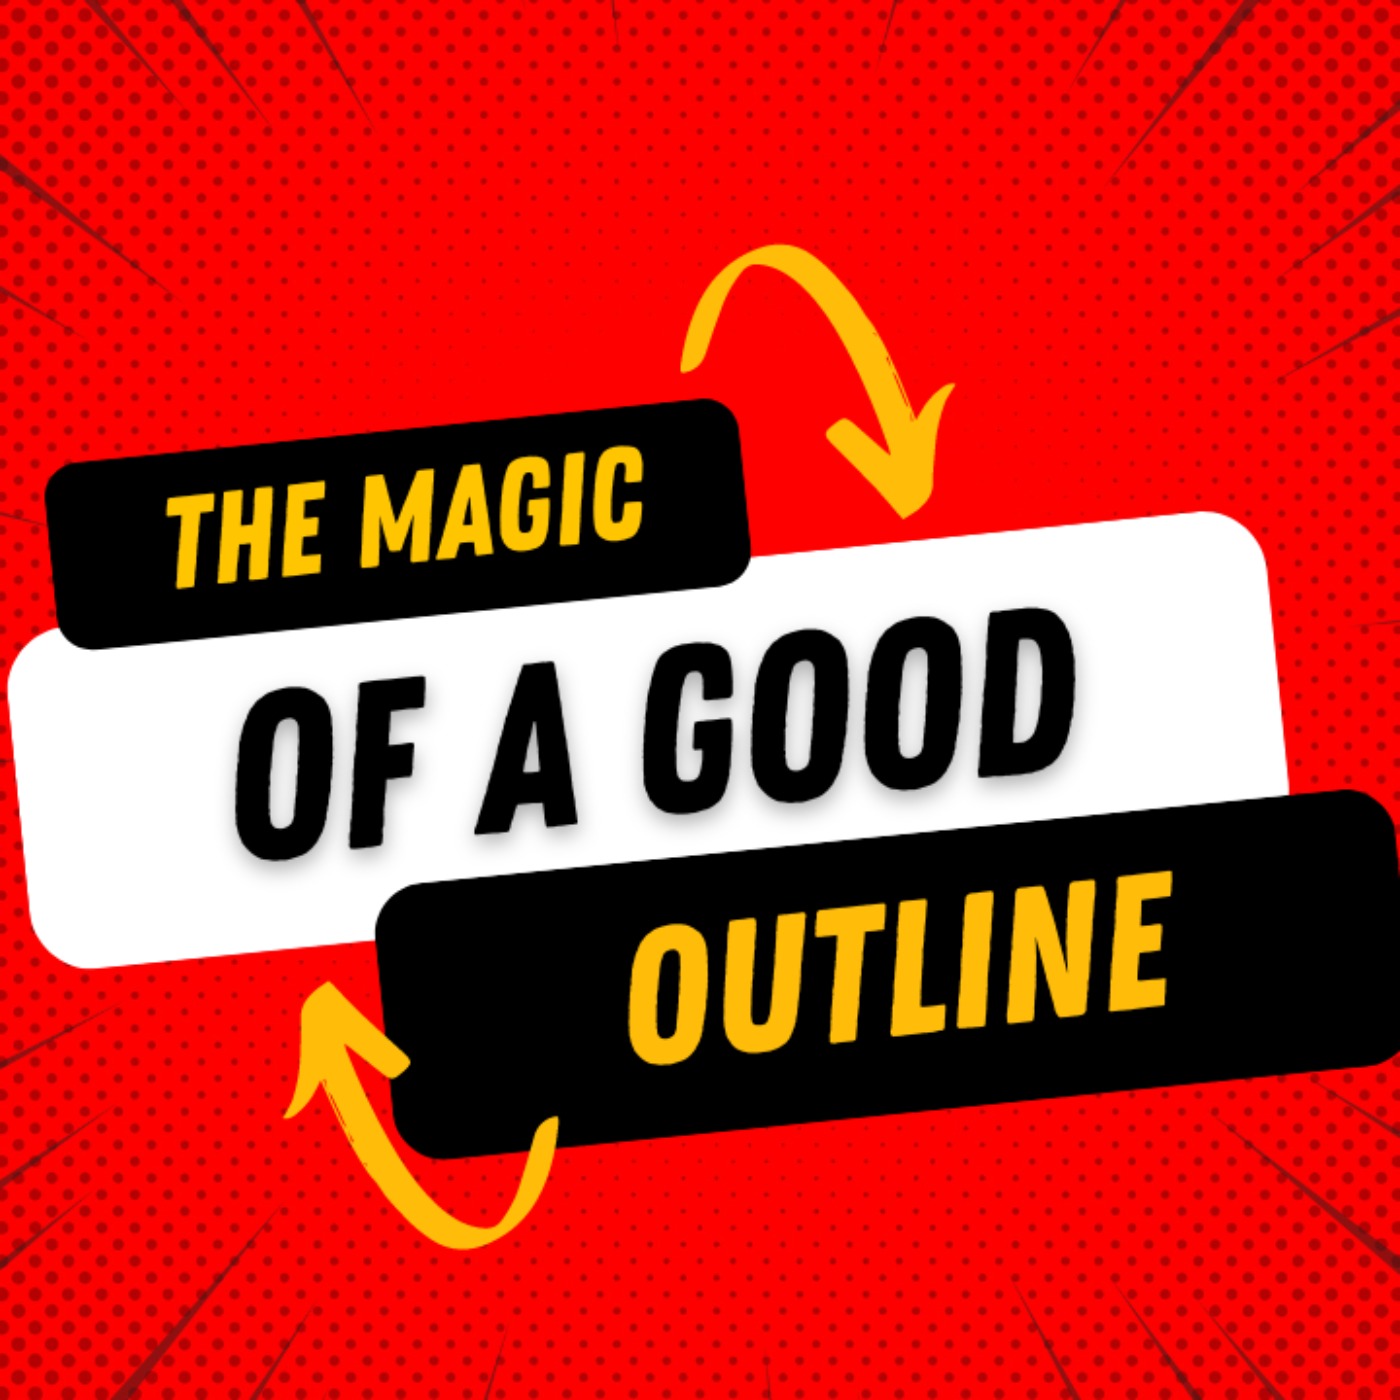 Ep. 341: AM Mason on the Life-Changing Magic of A Good Outline